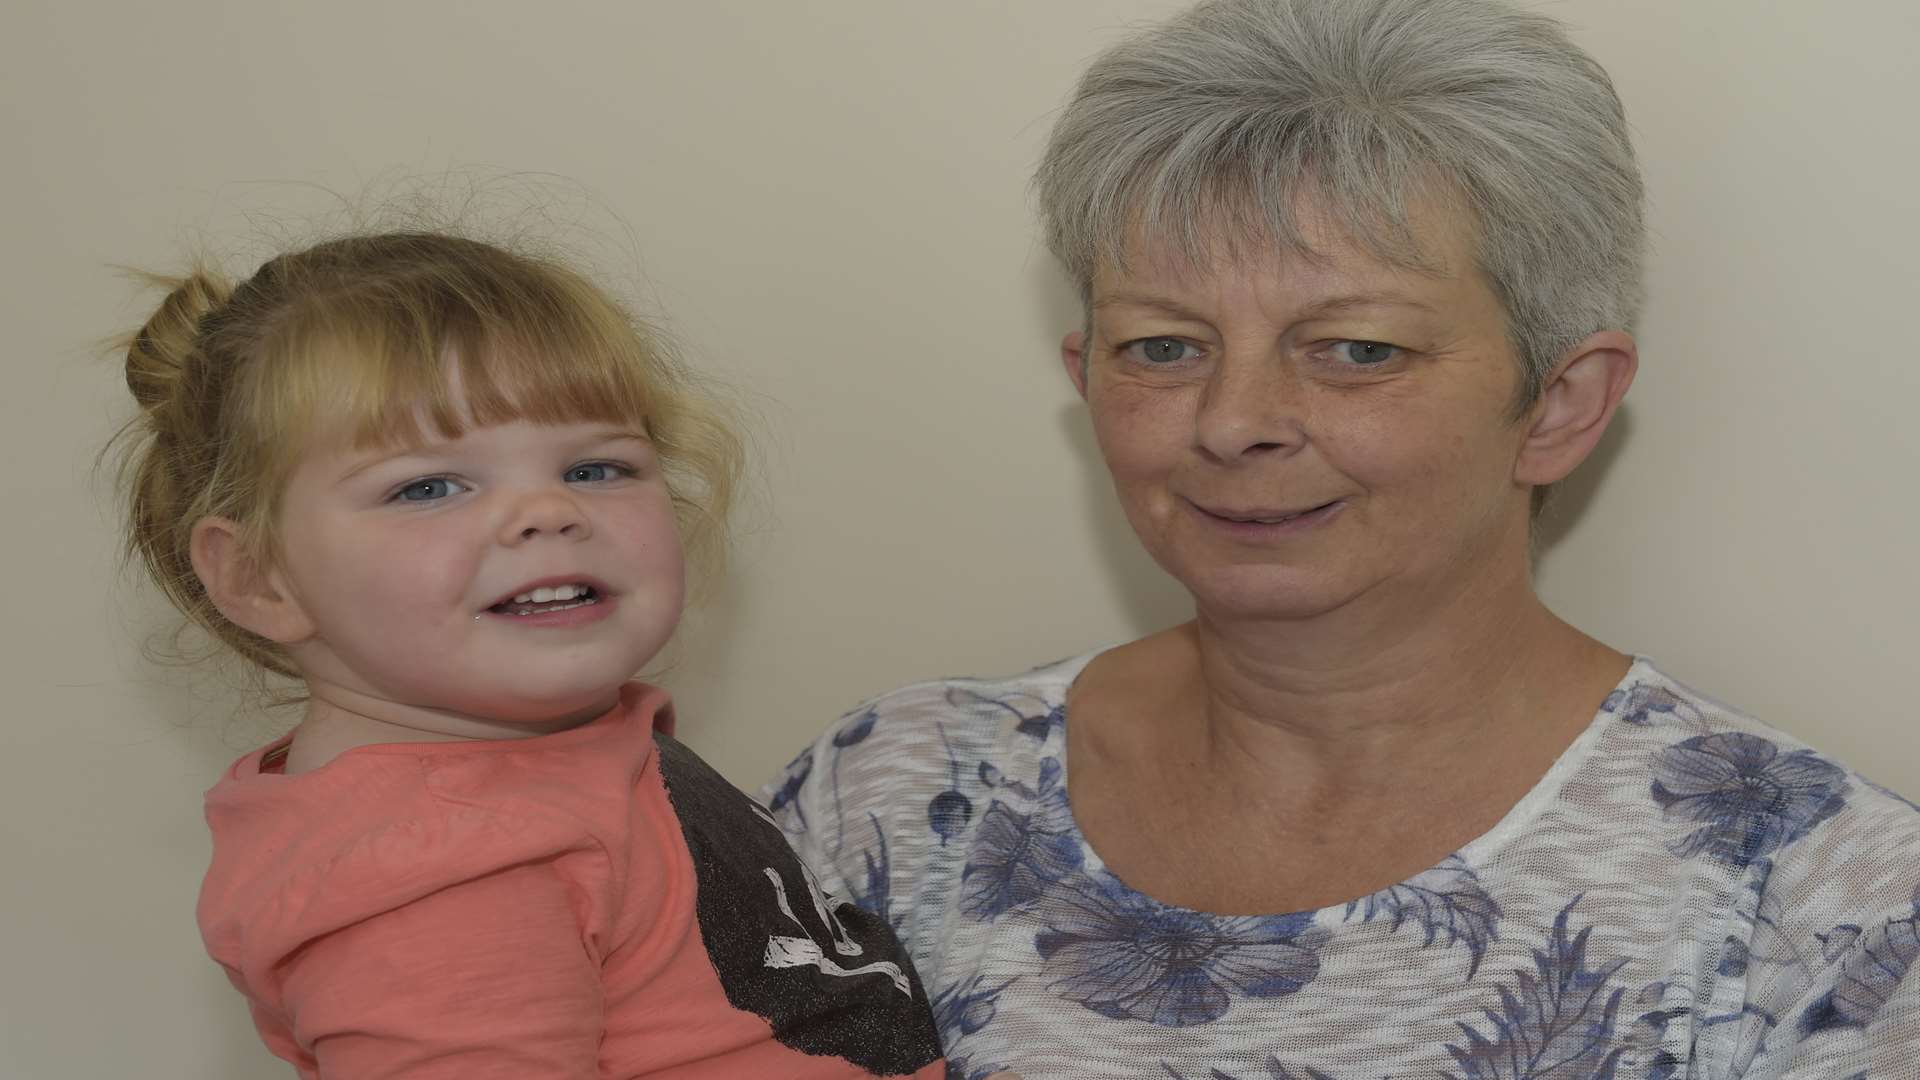 Ann Gardiner is fundraising to but a wheelchair for two year old Elana